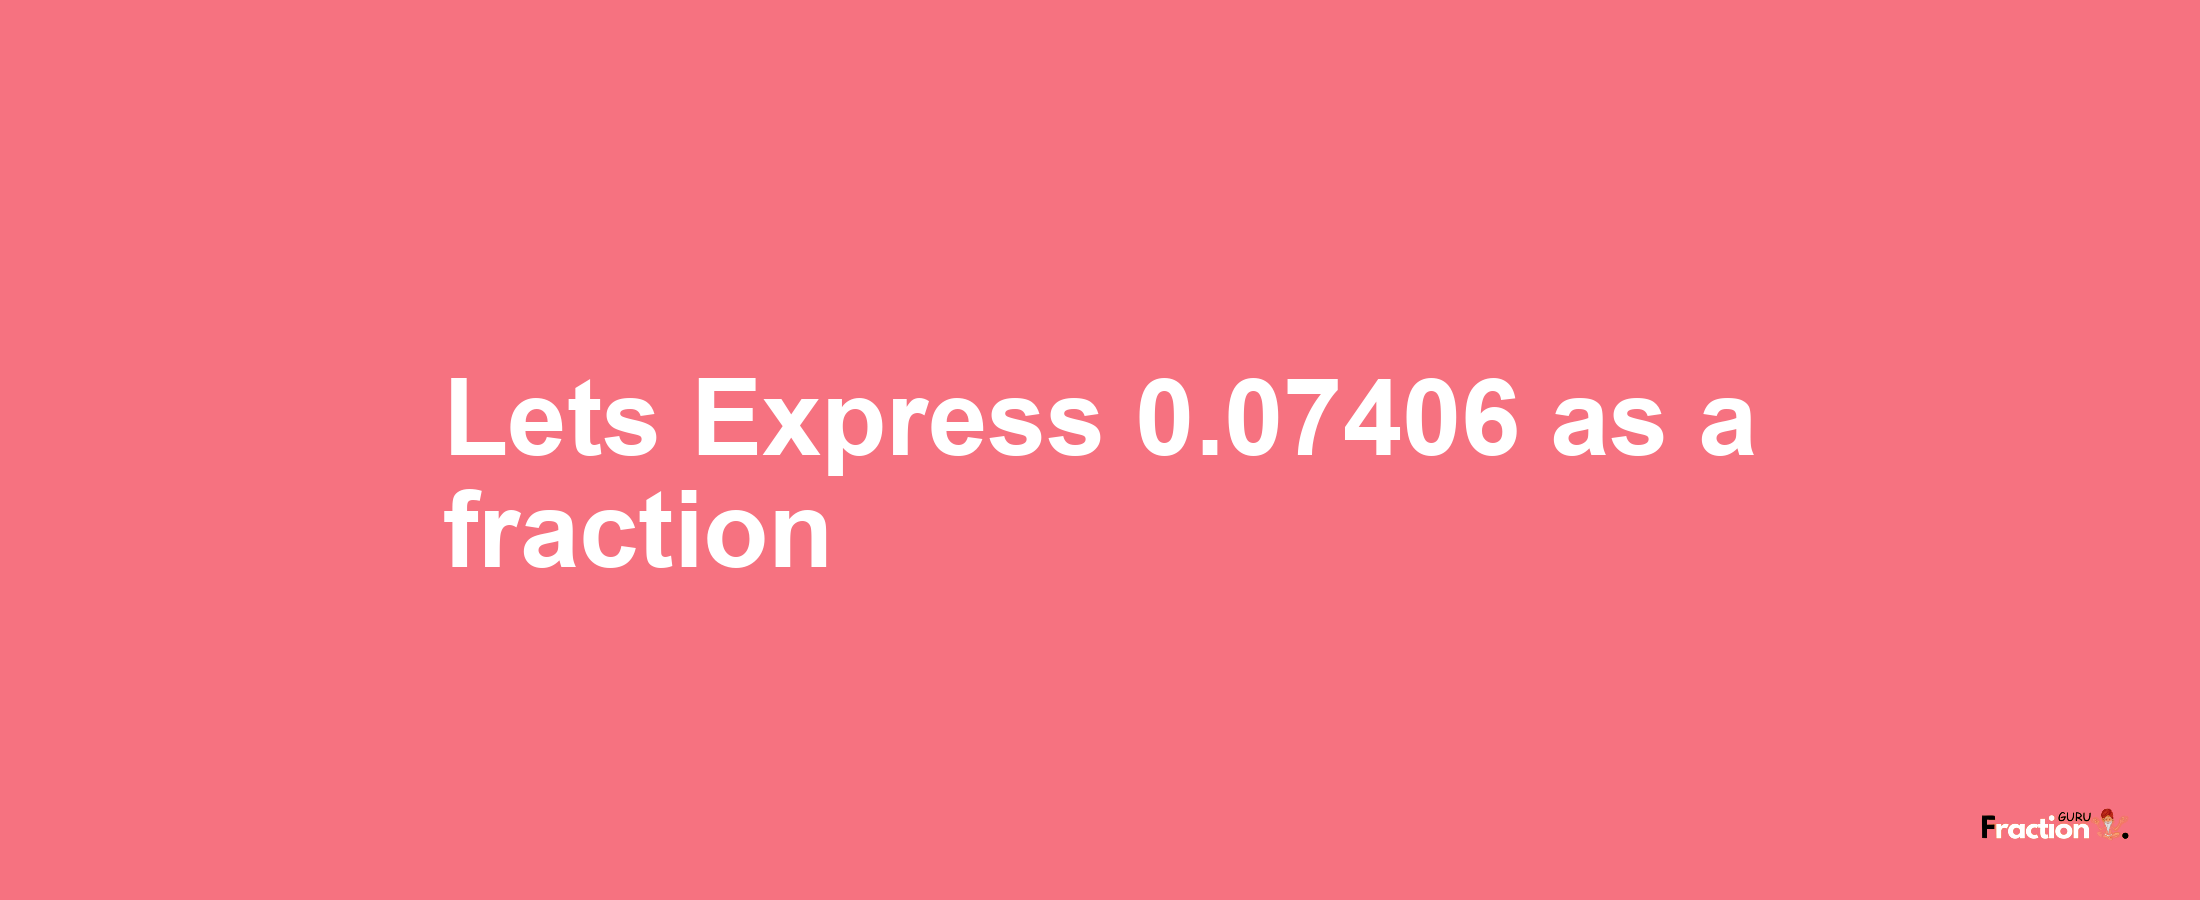 Lets Express 0.07406 as afraction